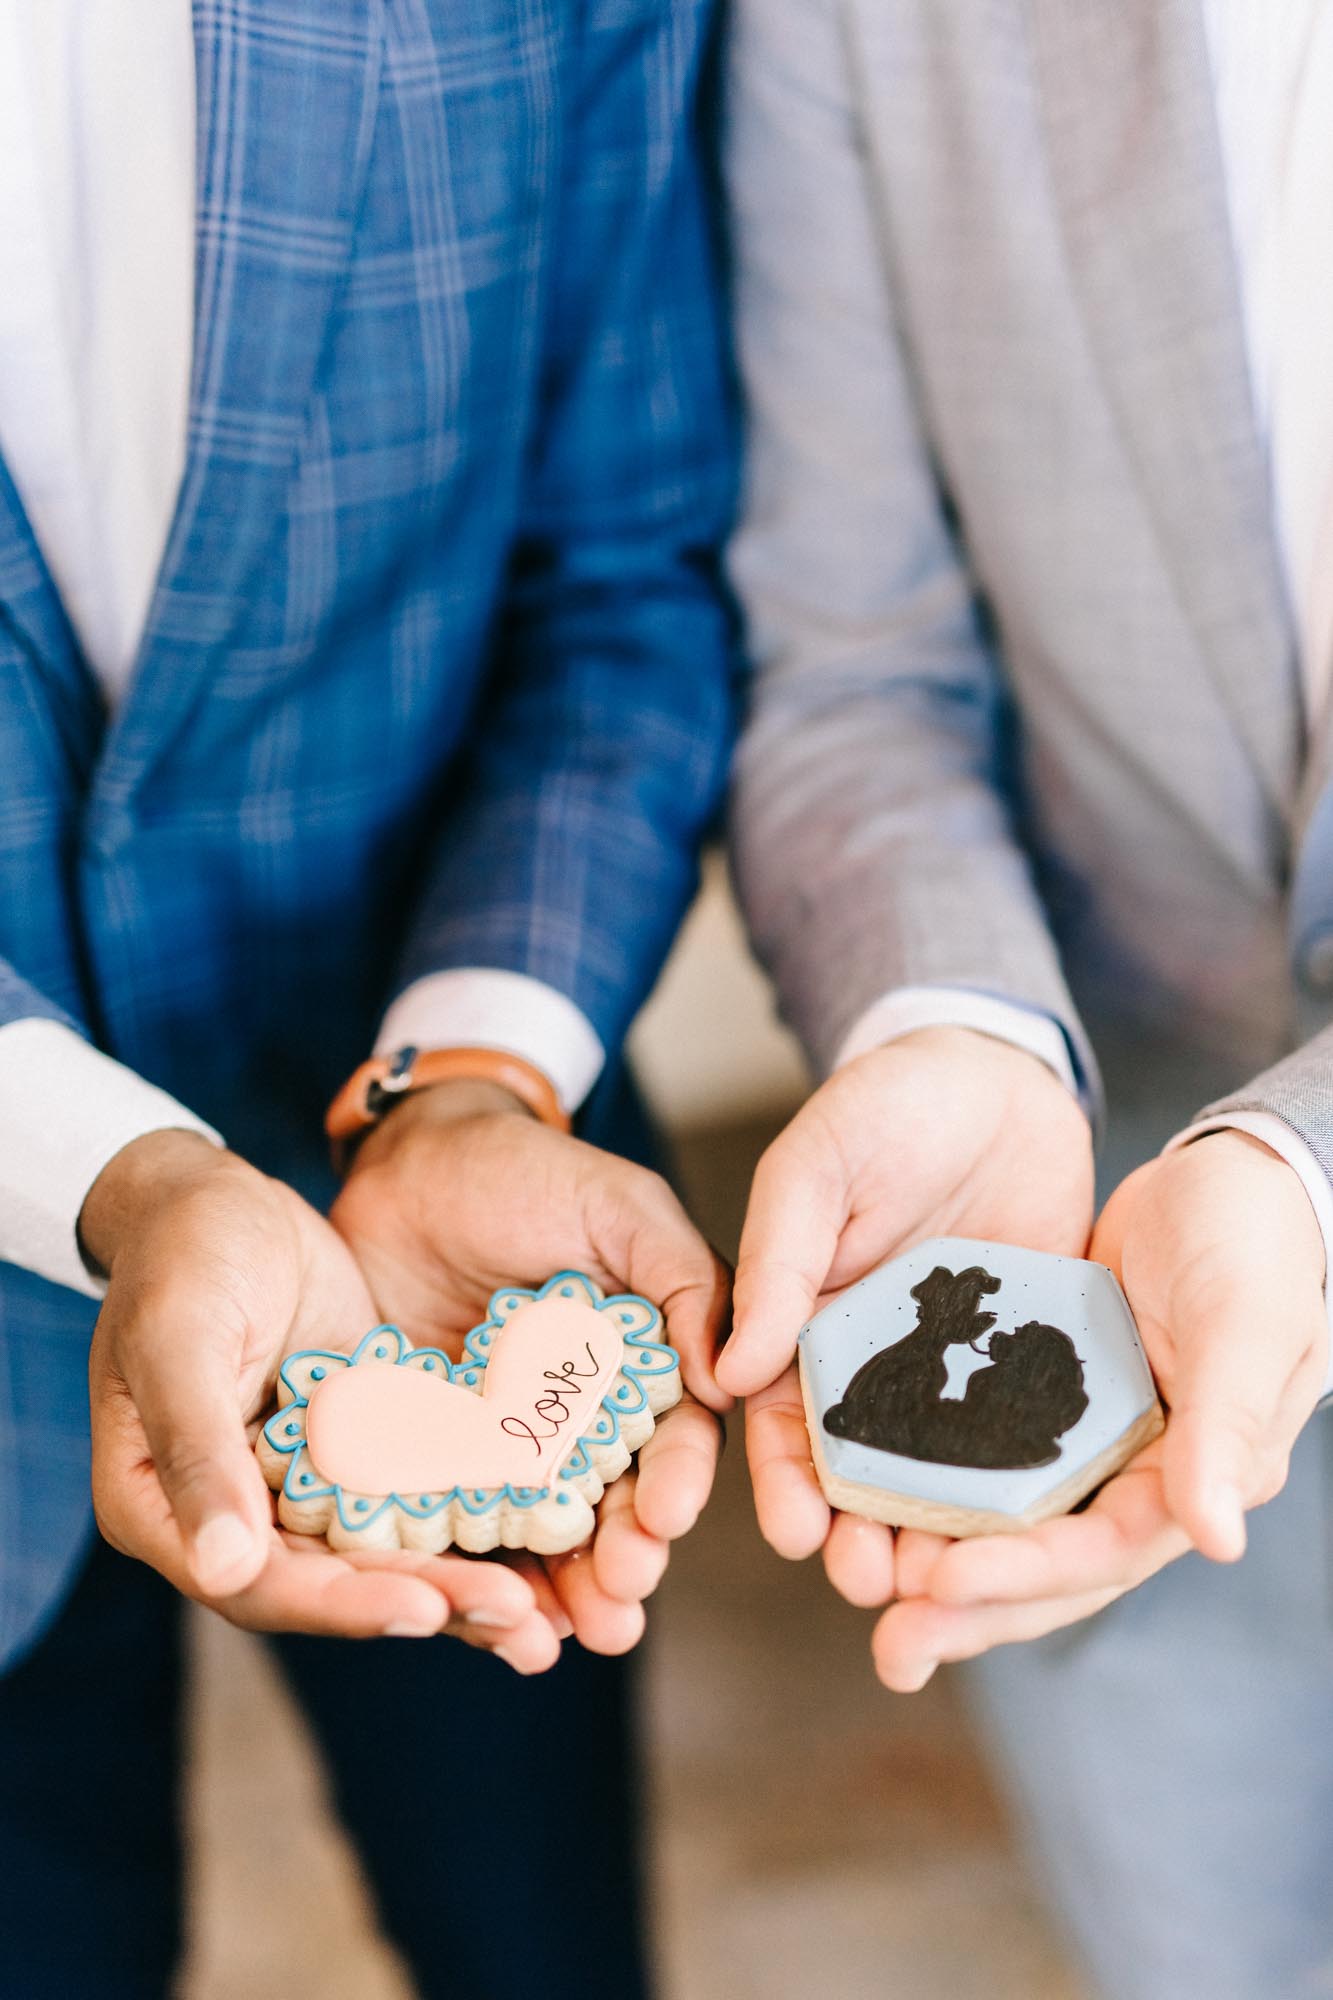 Disney World wedding ideas inspired by Lady and the Tramp | Emma Anne Photography | Featured on Equally Wed, the leading LGBTQ+ wedding magazine